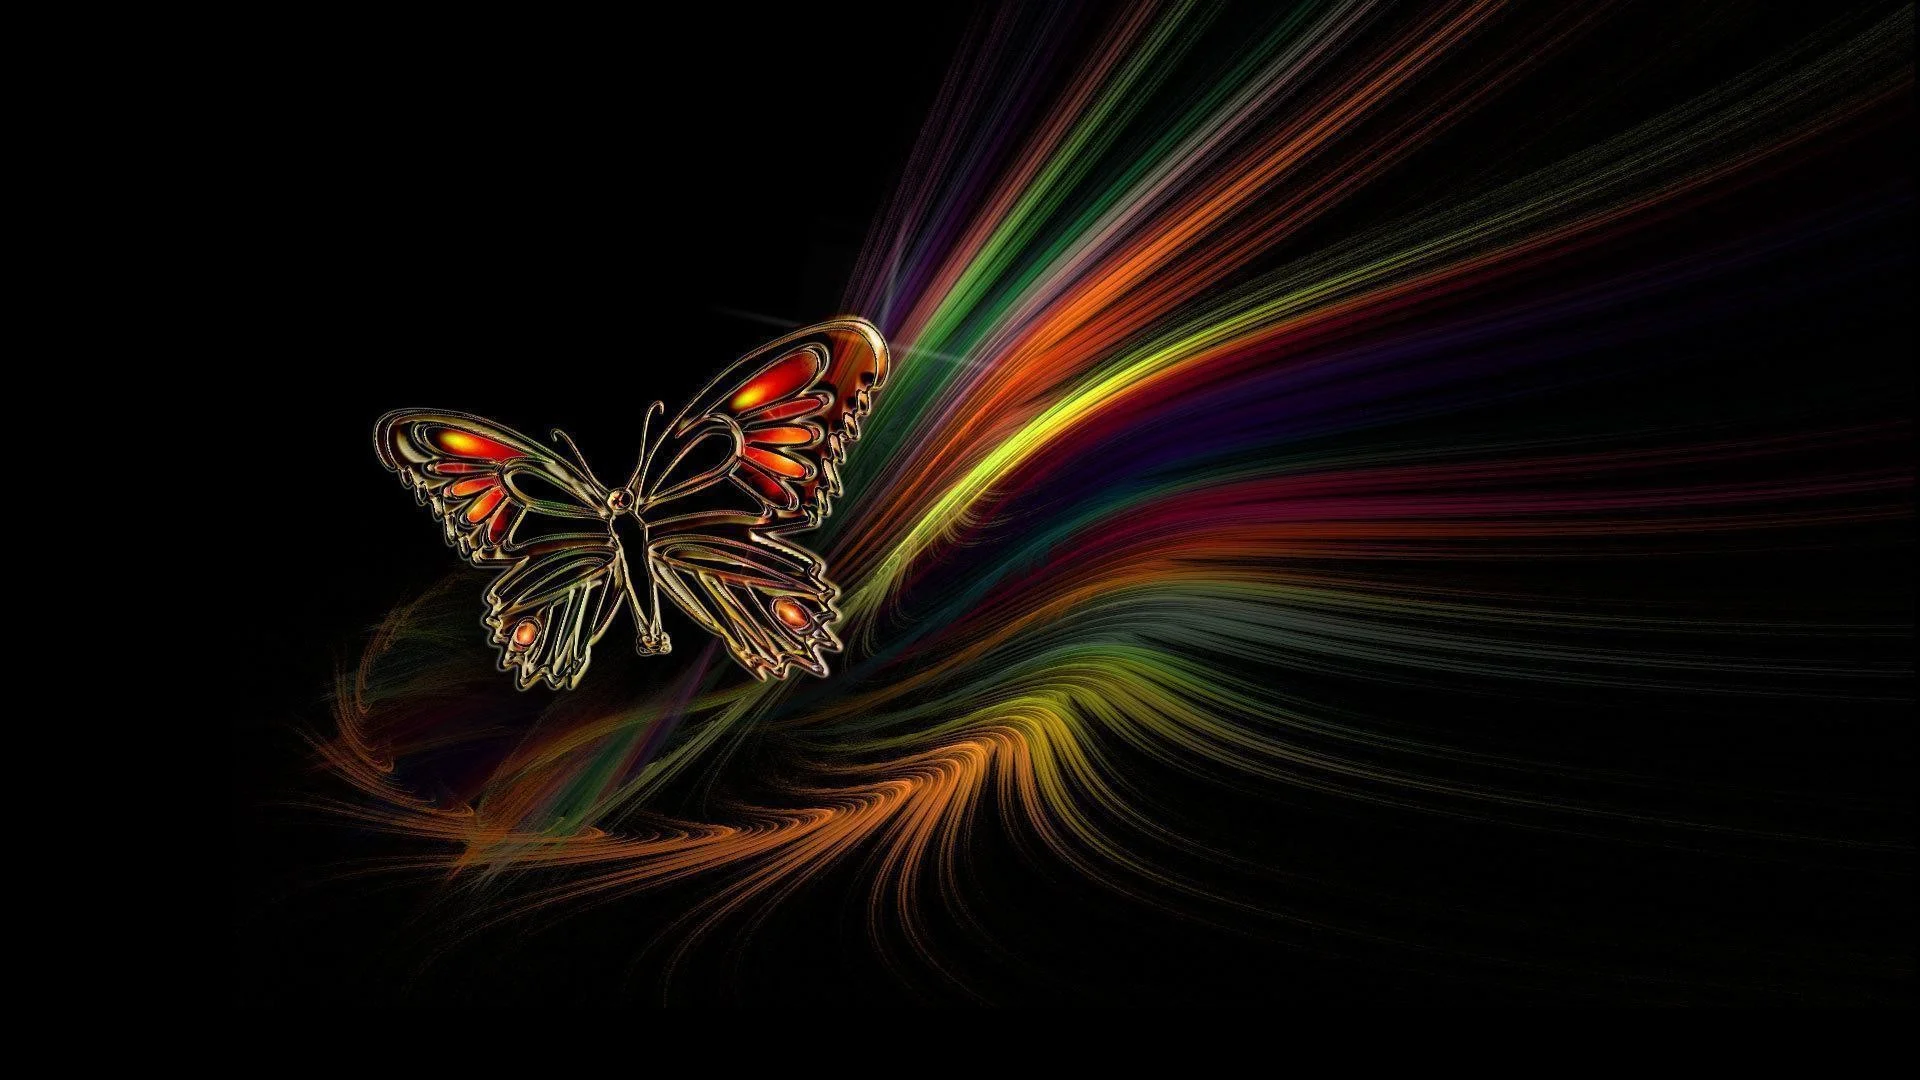 Beautiful Butterfly Abstract HD Wallpaper For Desktop Backgrounds